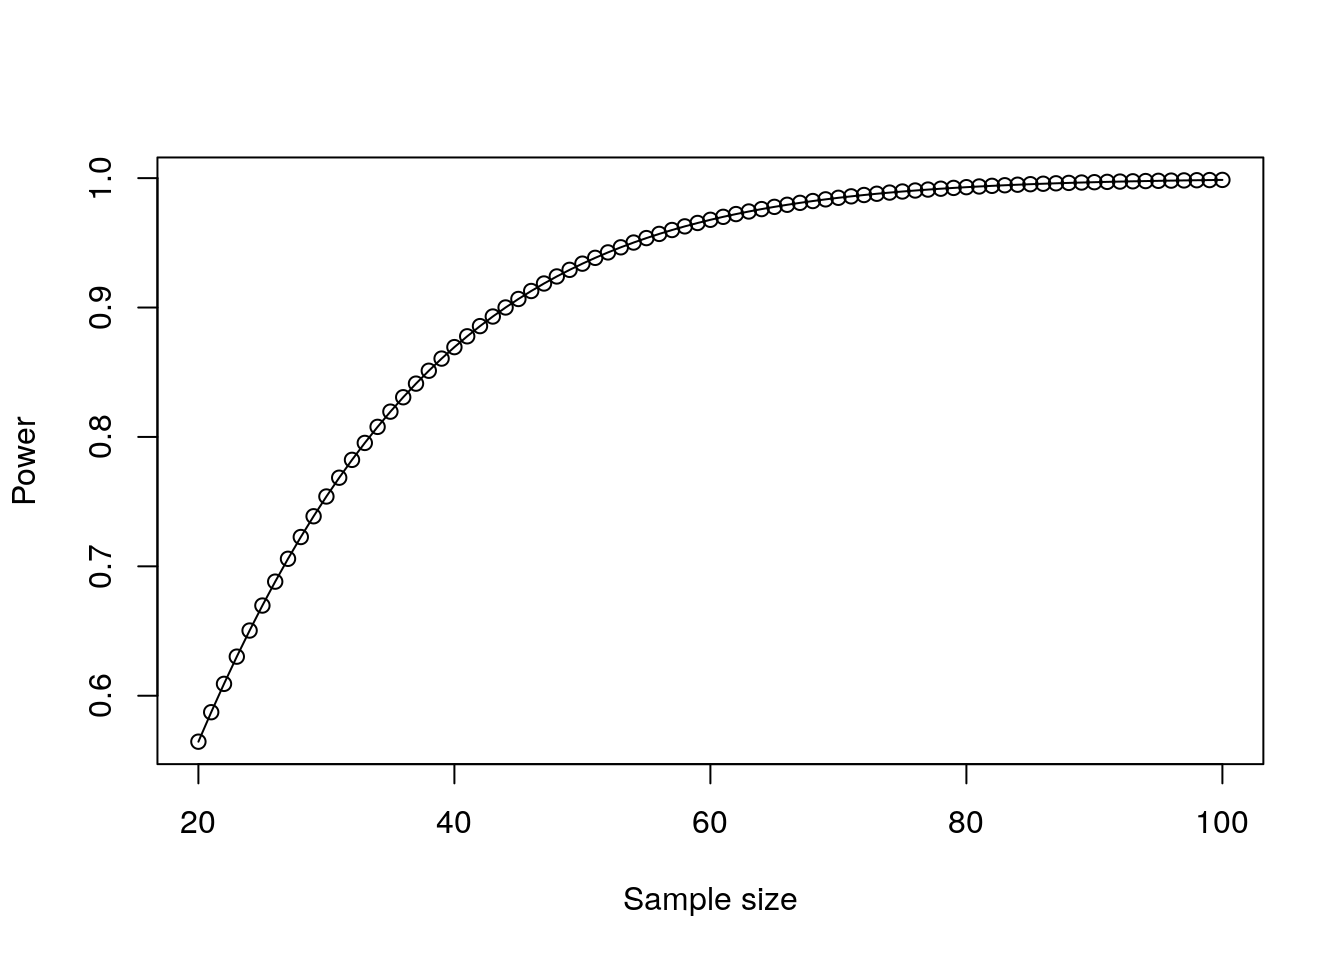 Plot of power against sample size for a paired t-test